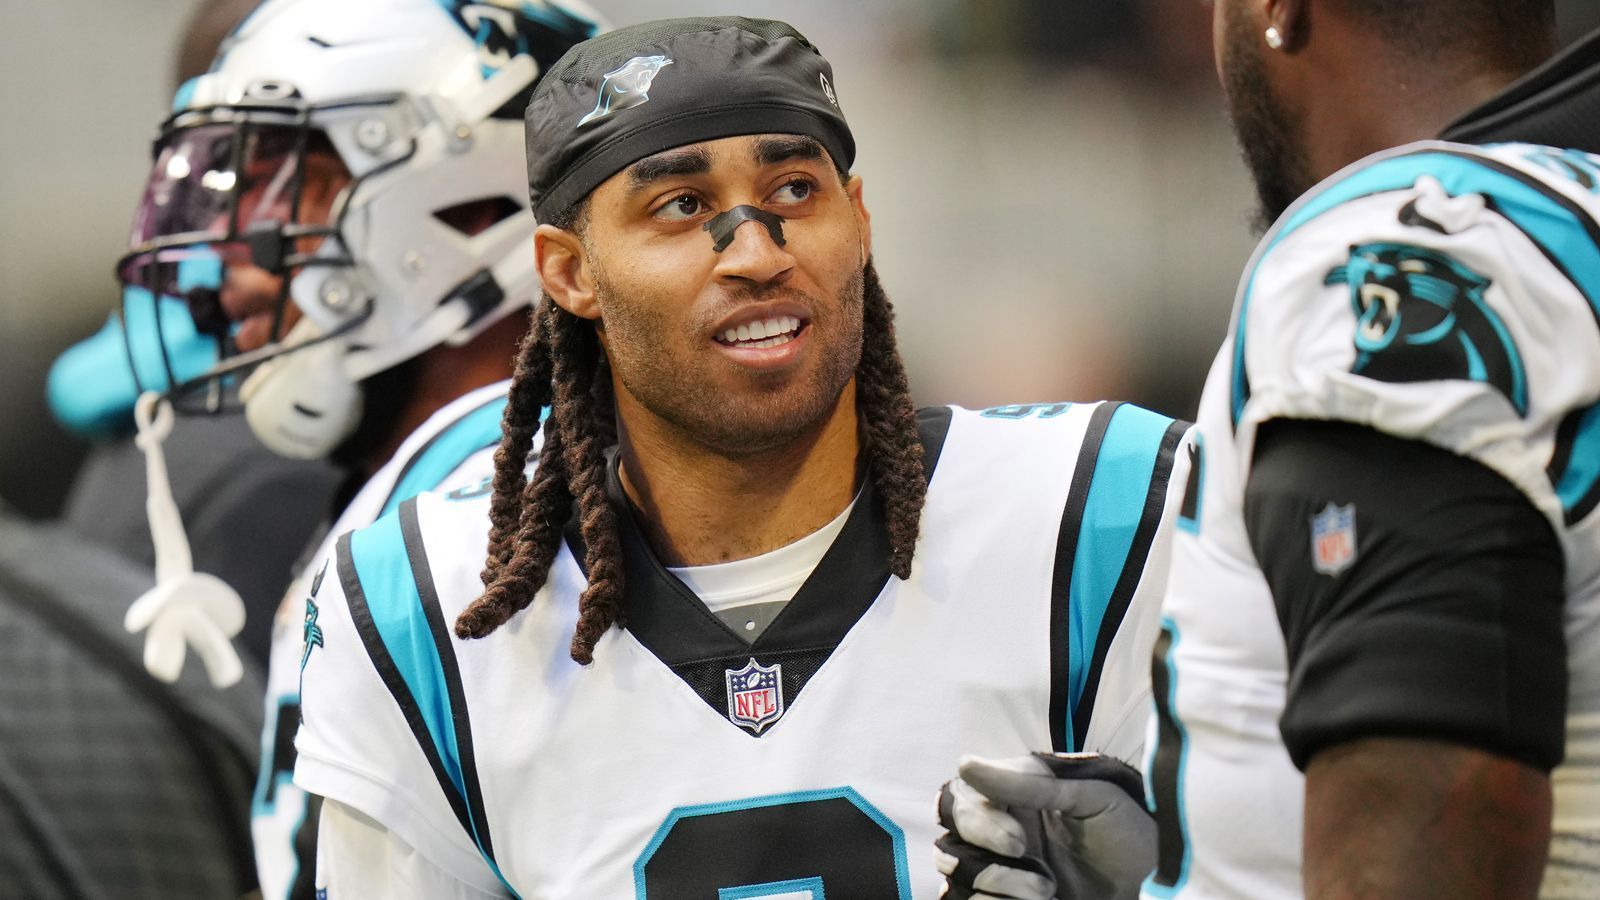 
                <strong>Stephon Gilmore (Indianapolis Colts)</strong><br>
                &#x2022; <strong>Position</strong>: Cornerback<br>&#x2022; <strong>Durchschnittlicher Top-Verdiener Cornerbacks</strong>: Jaire Alexander (<strong></strong> Millionen Dollar jährlich)<br>&#x2022; <strong>Durchschnittlicher Verdienst Stephon Gilmore</strong>: <strong></strong> Millionen Dollar jährlich<br>&#x2022; <strong>Top-Verdiener Cornerbacks 2022</strong>: Jalen Ramsey (<strong>23,2</strong> Millionen Dollar)<br>&#x2022; <strong>Verdienst 2022 </strong><strong>Stephon Gilmore</strong>: <strong>7,75</strong> Millionen Dollar<br>
              